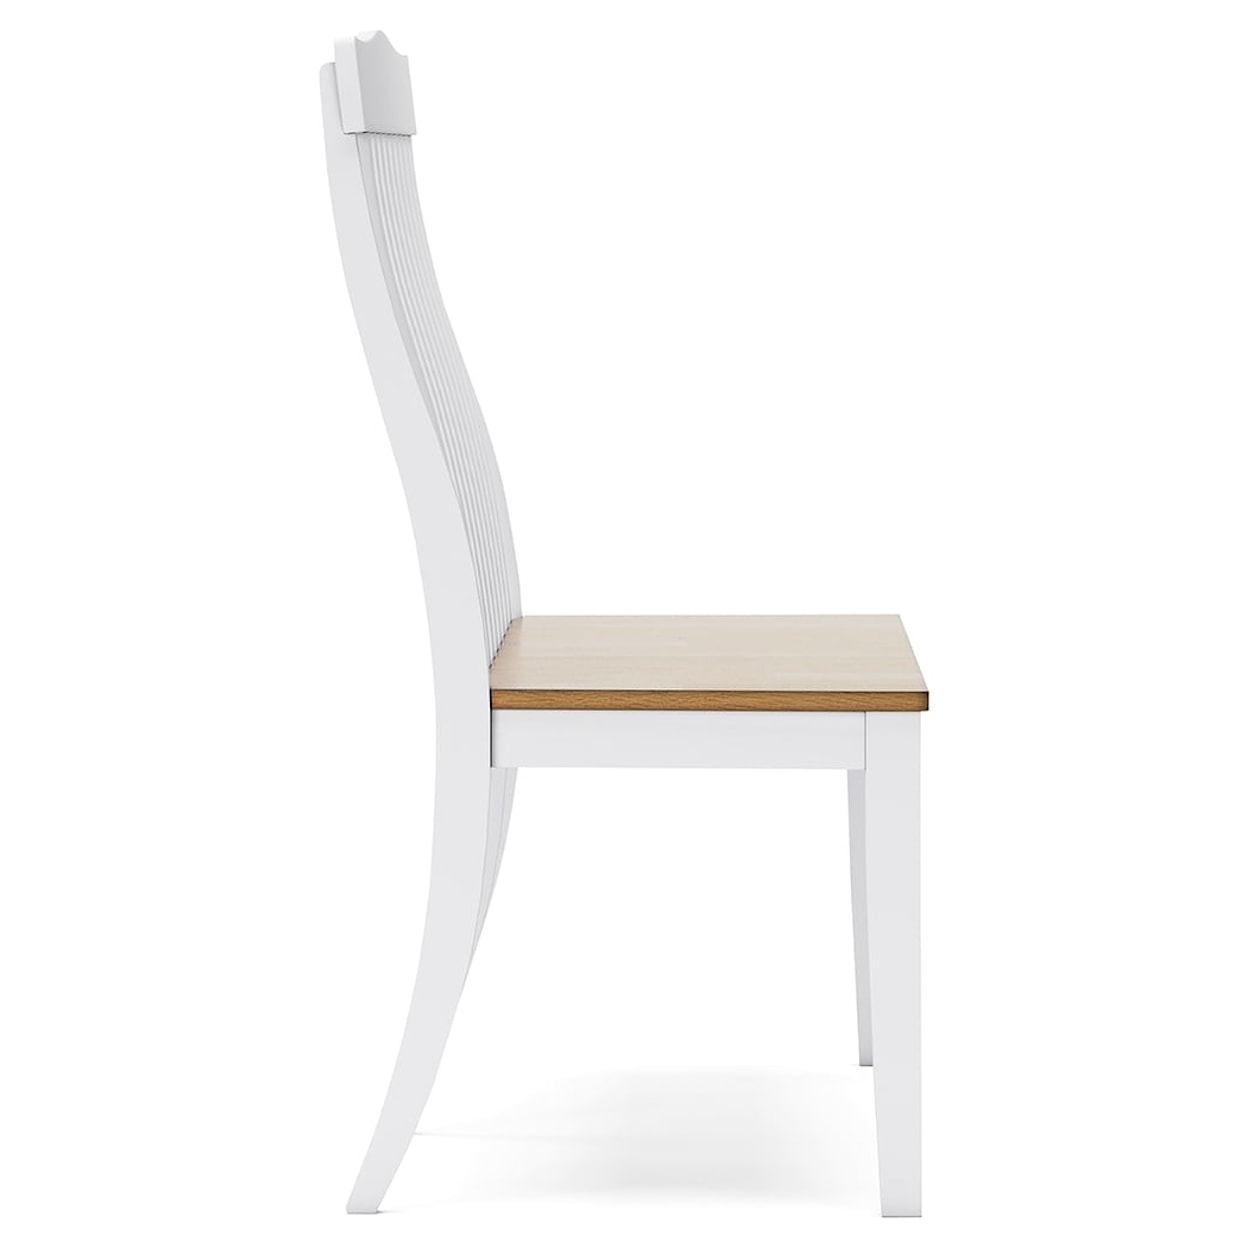 Ashley Furniture Signature Design Ashbryn Double Dining Chair